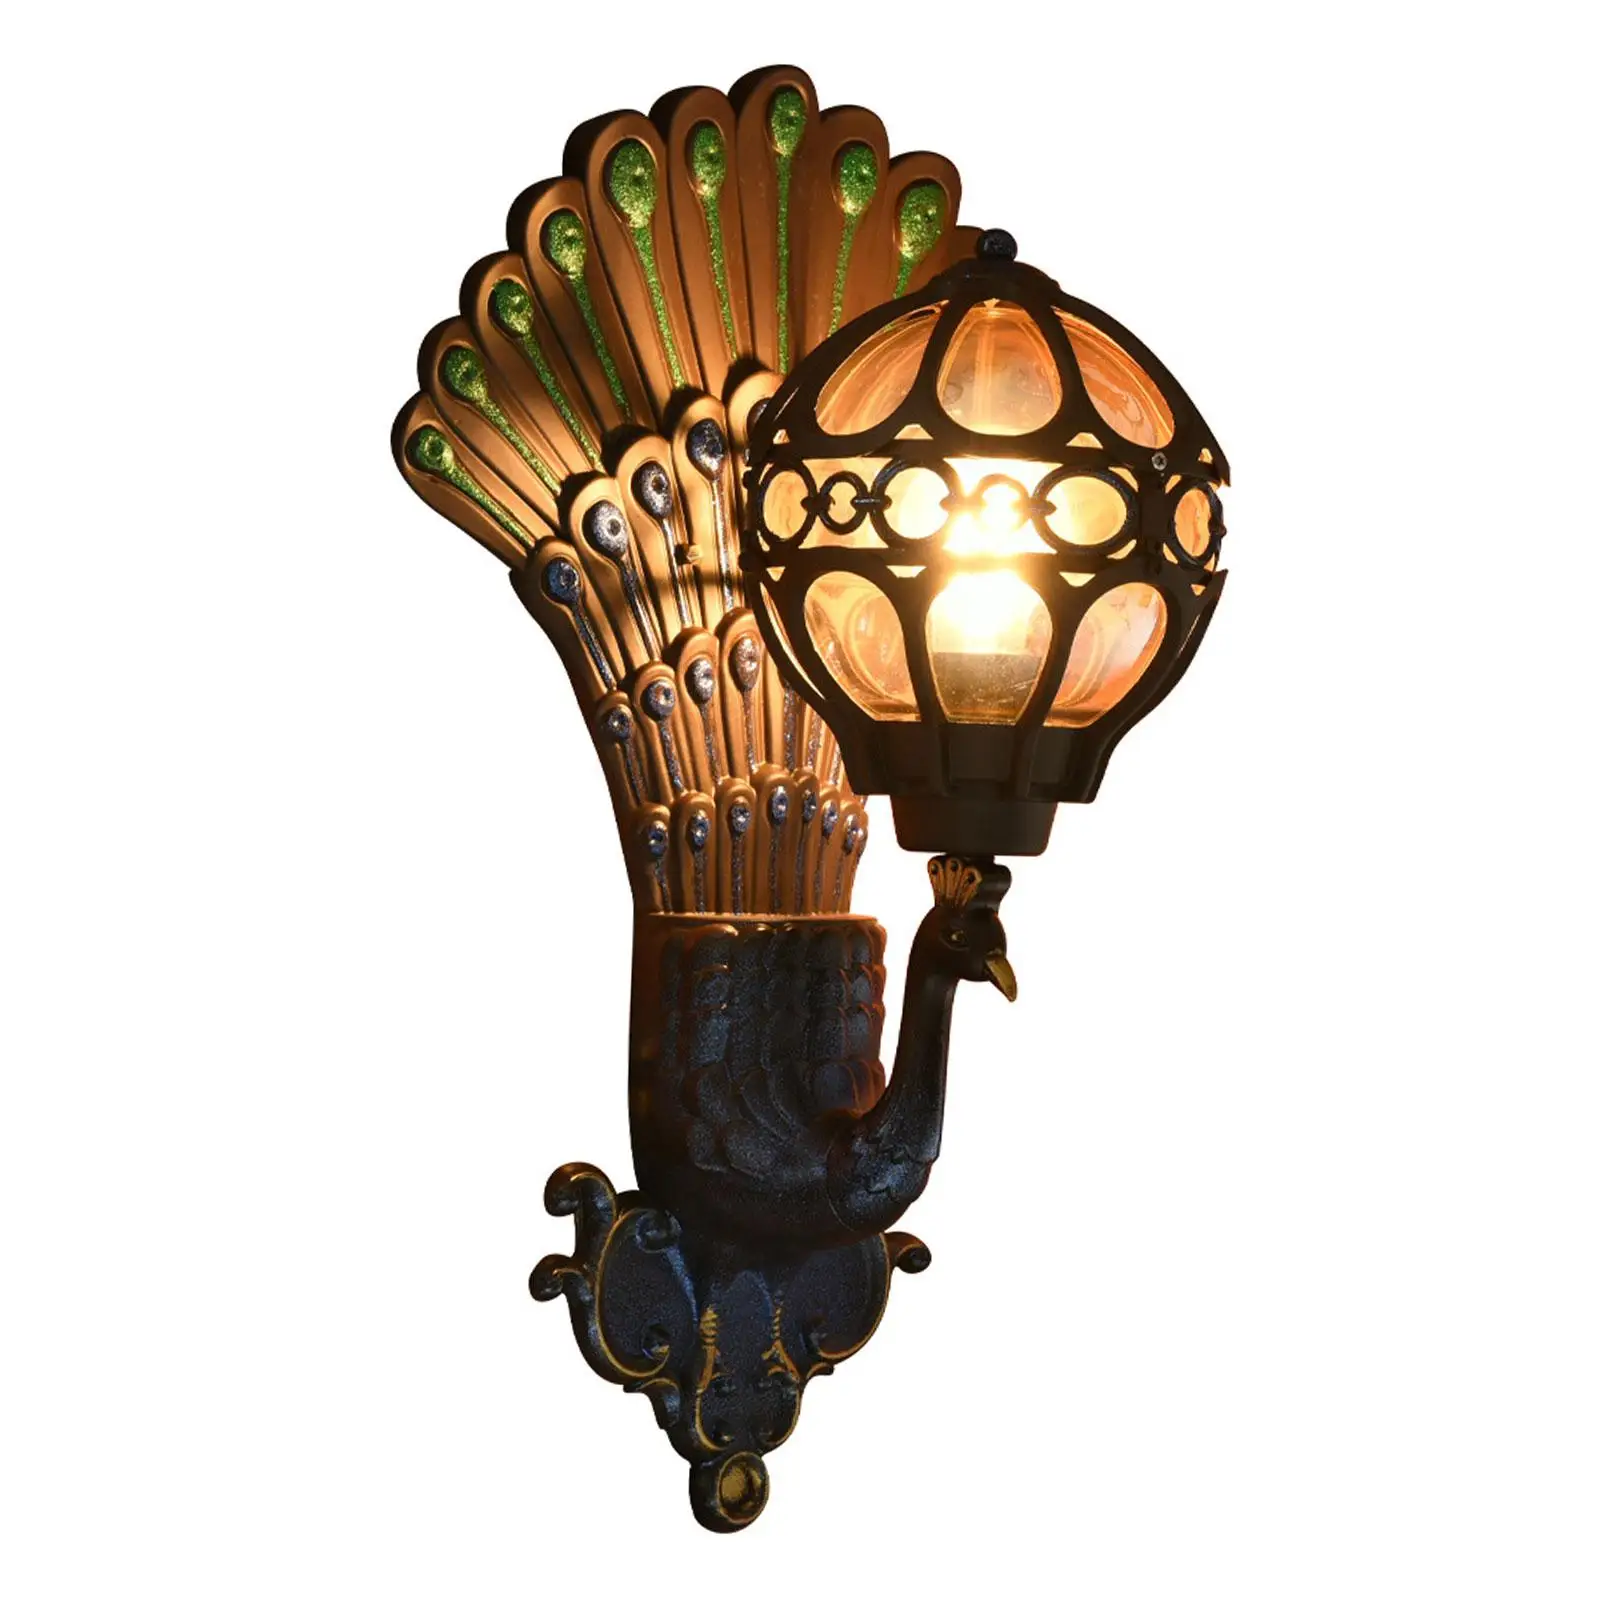 Outdoor Peacock Wall Light Landscape Lights Creative Retro Style Waterproof Wall Lamps for Outdoor Courtyard Deck Patio Decor